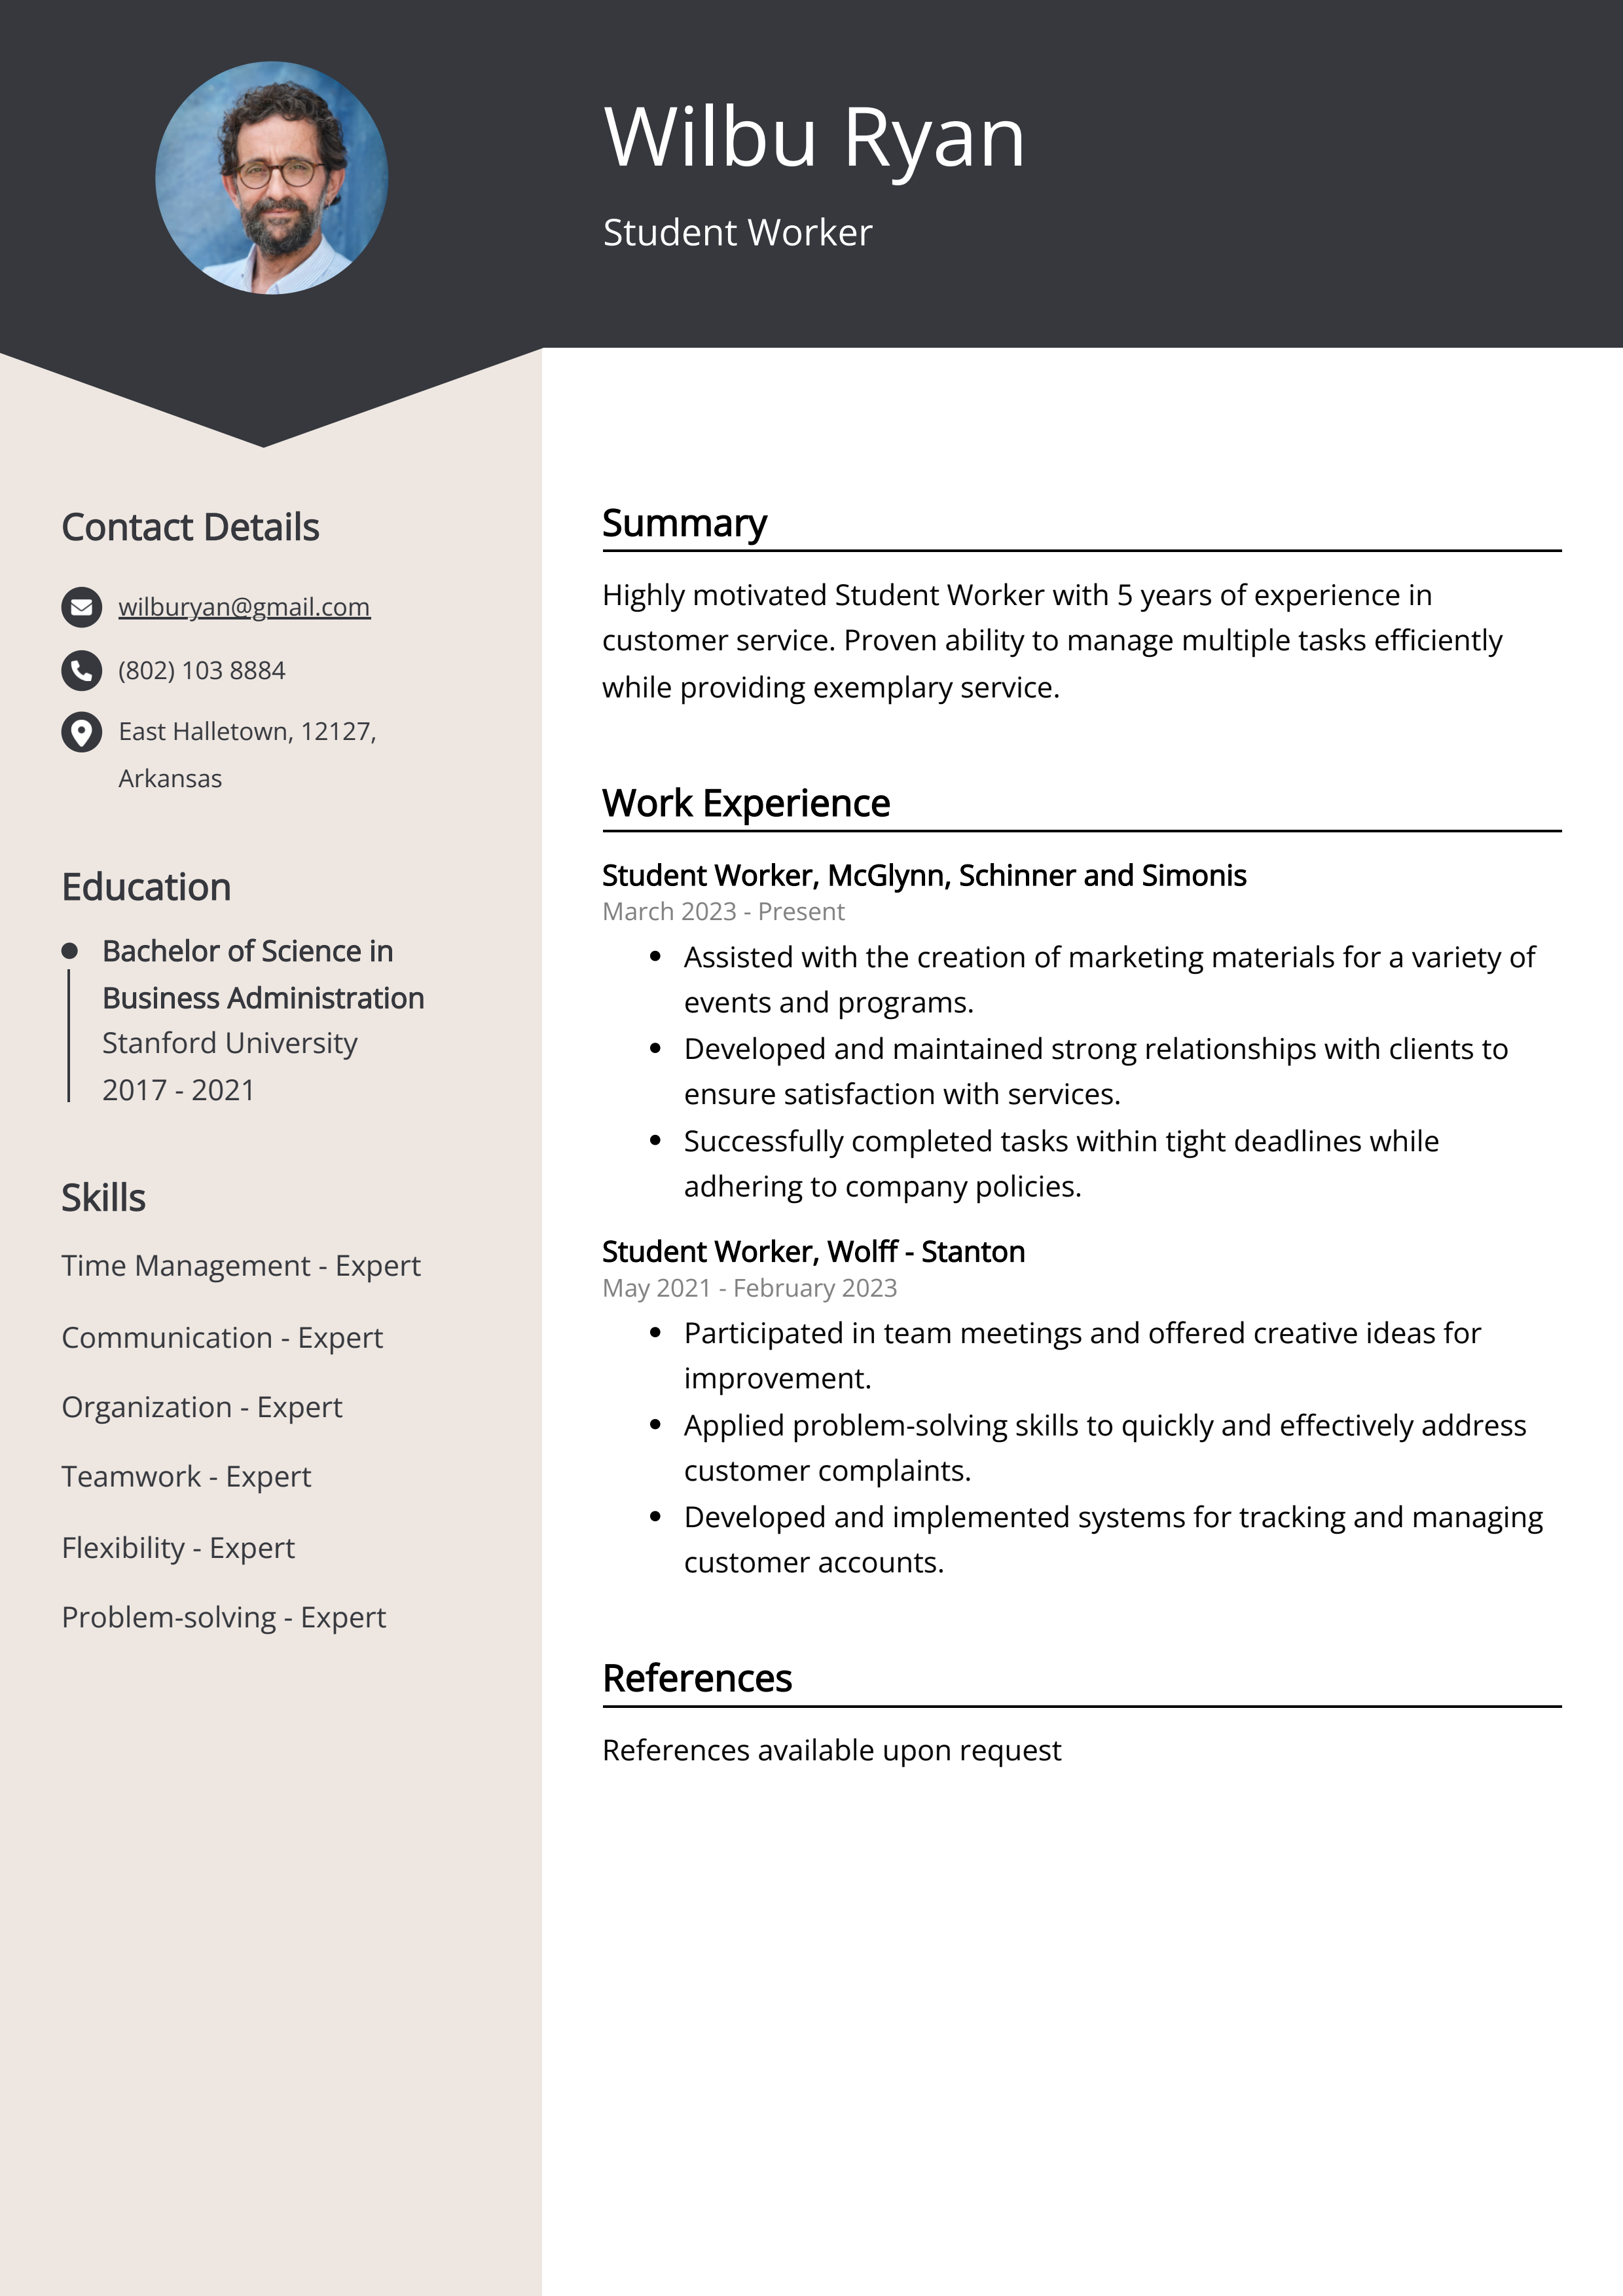 Student Worker CV Example